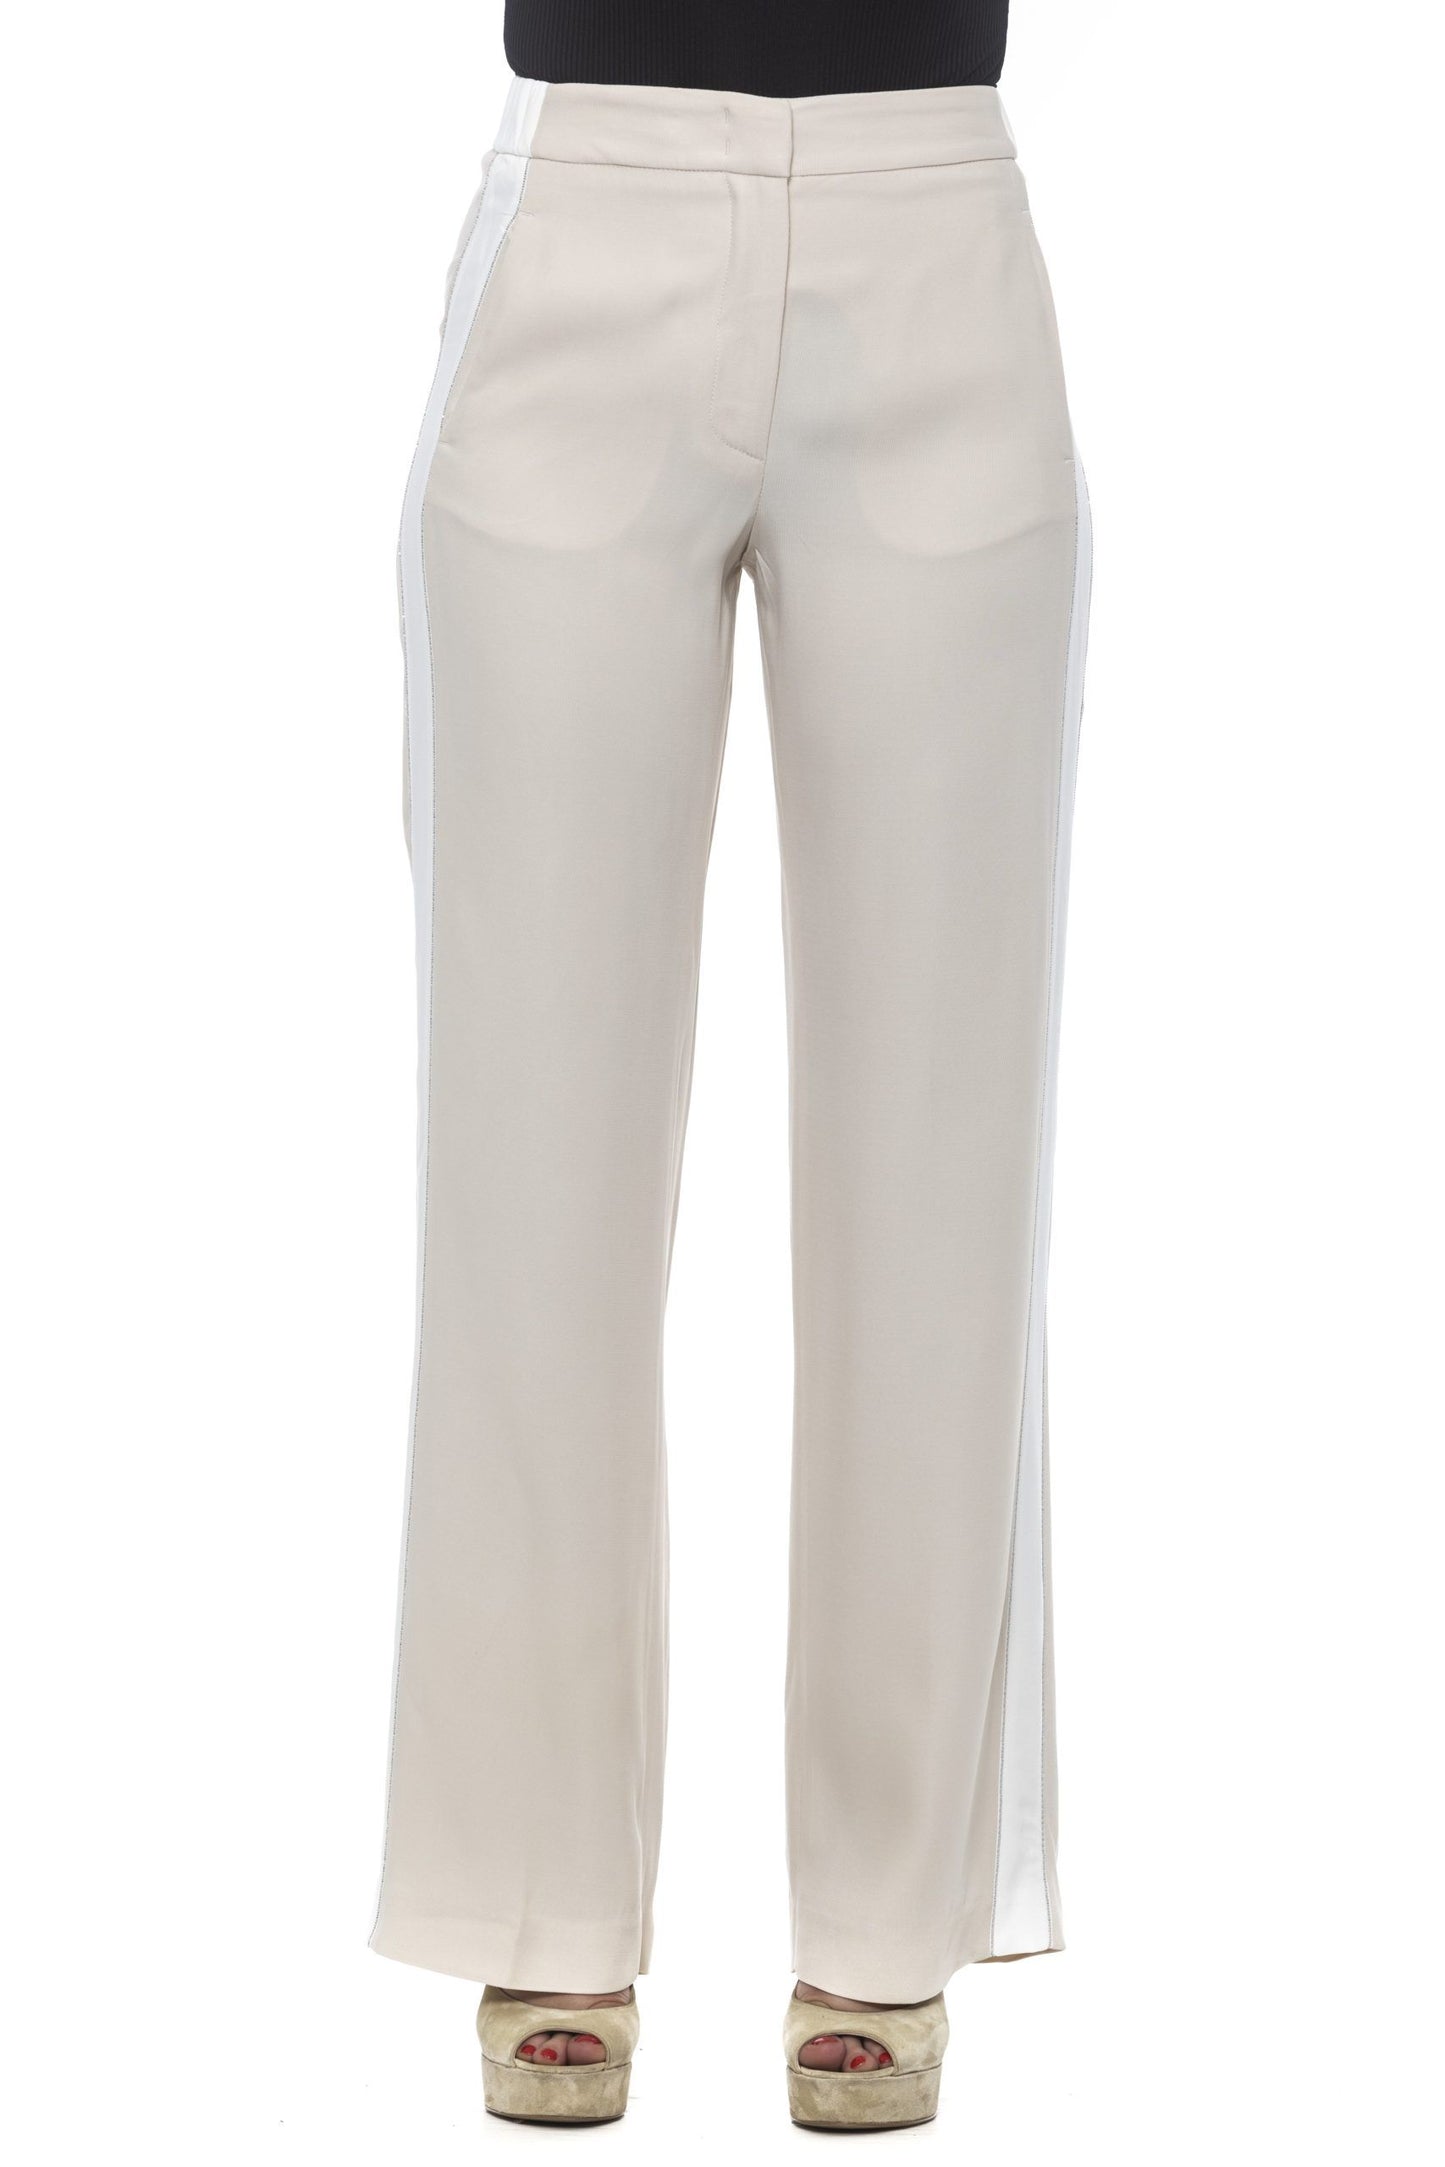 Chic Beige Palazzo Pants with Luminous Detailing